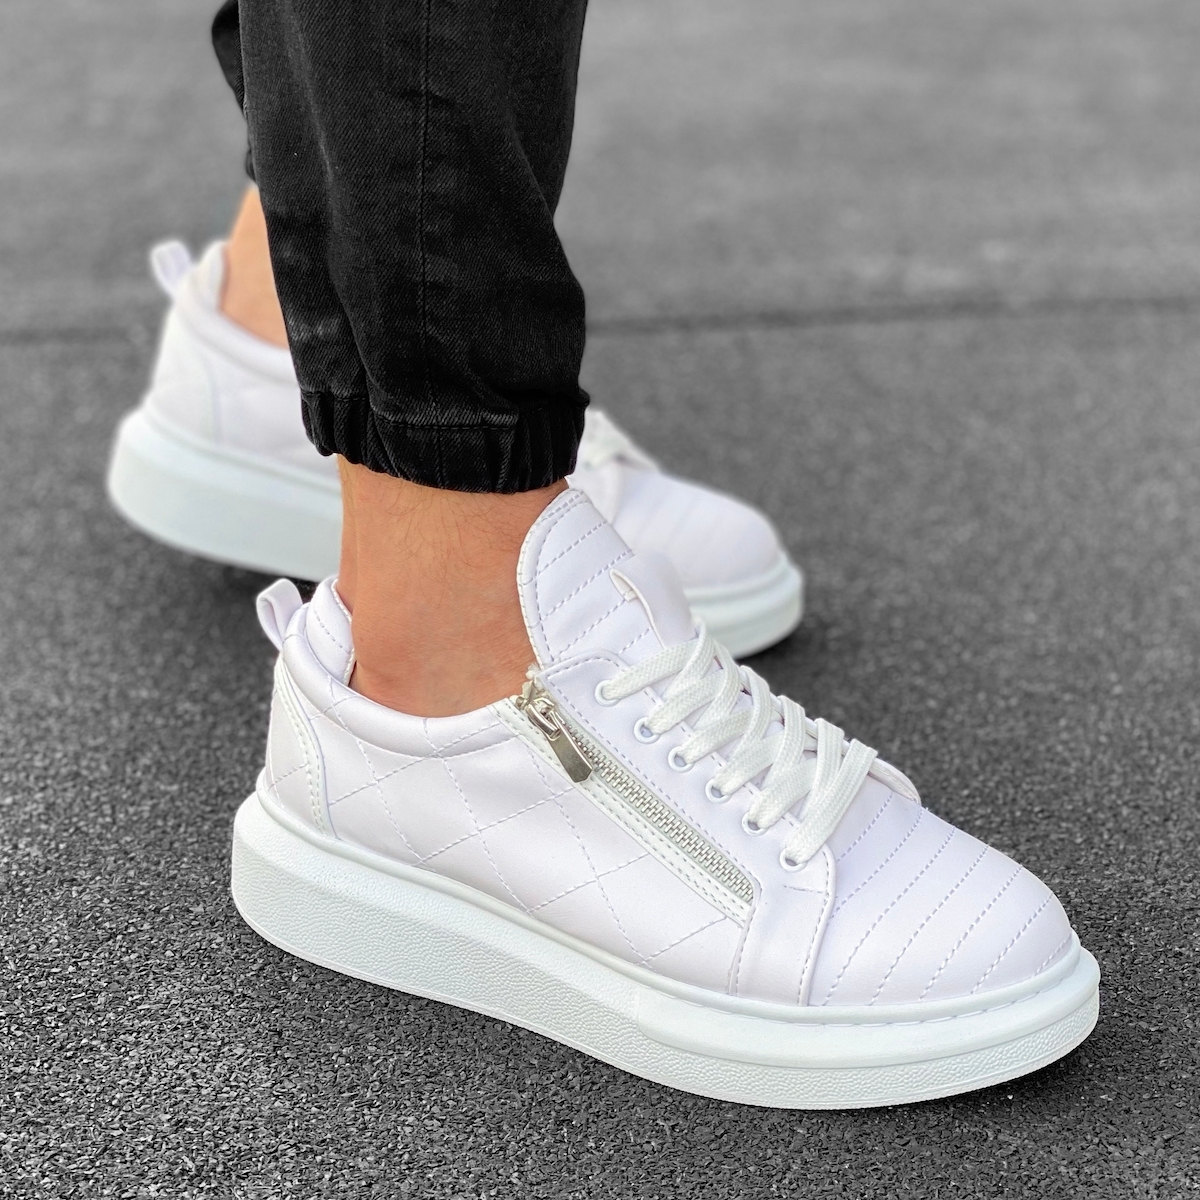 white sneakers with zipper